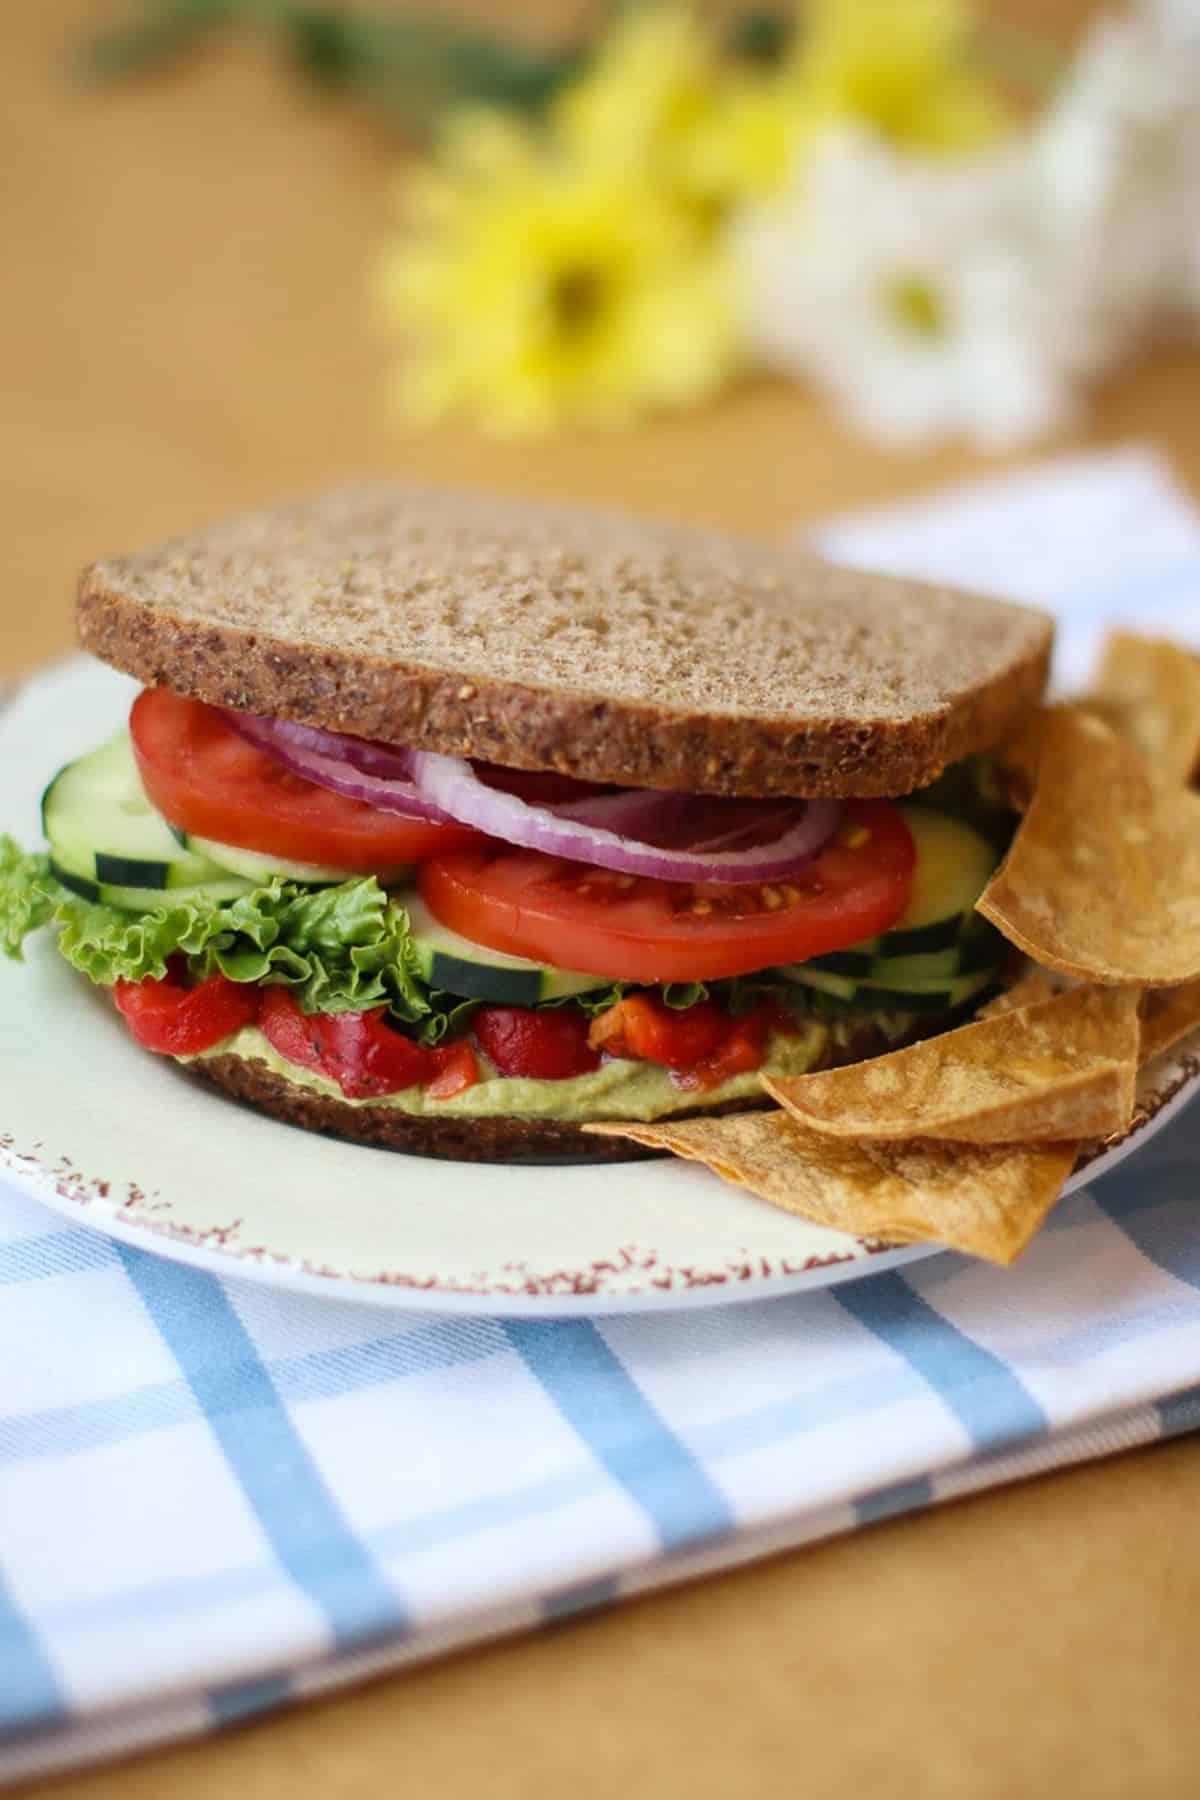 cucumber, tomatoes, lettuce, and other veggies on whole grain bread.